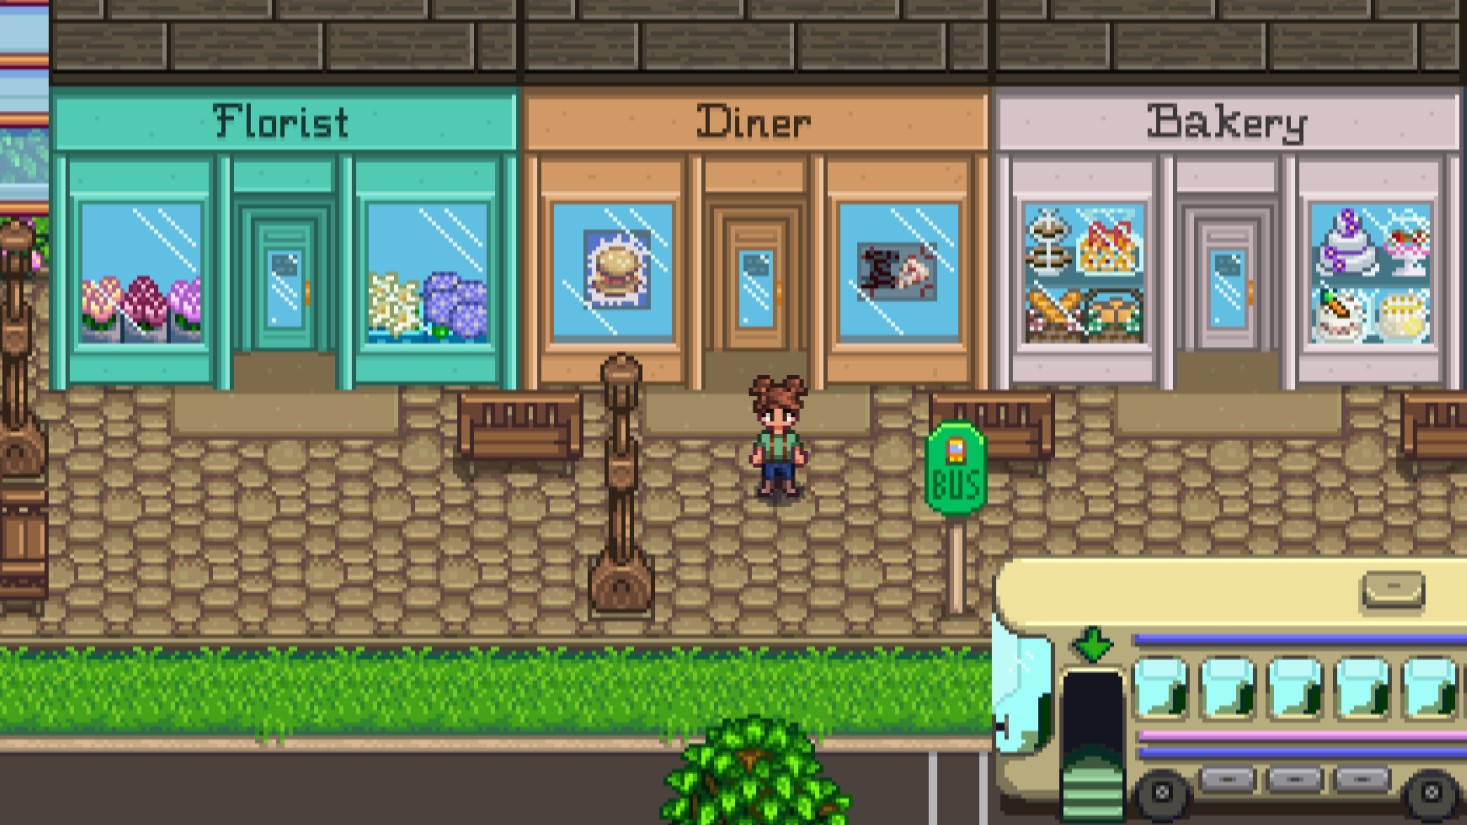 This Stardew Valley Mod Adds Six Cute New Shops To The Base Game